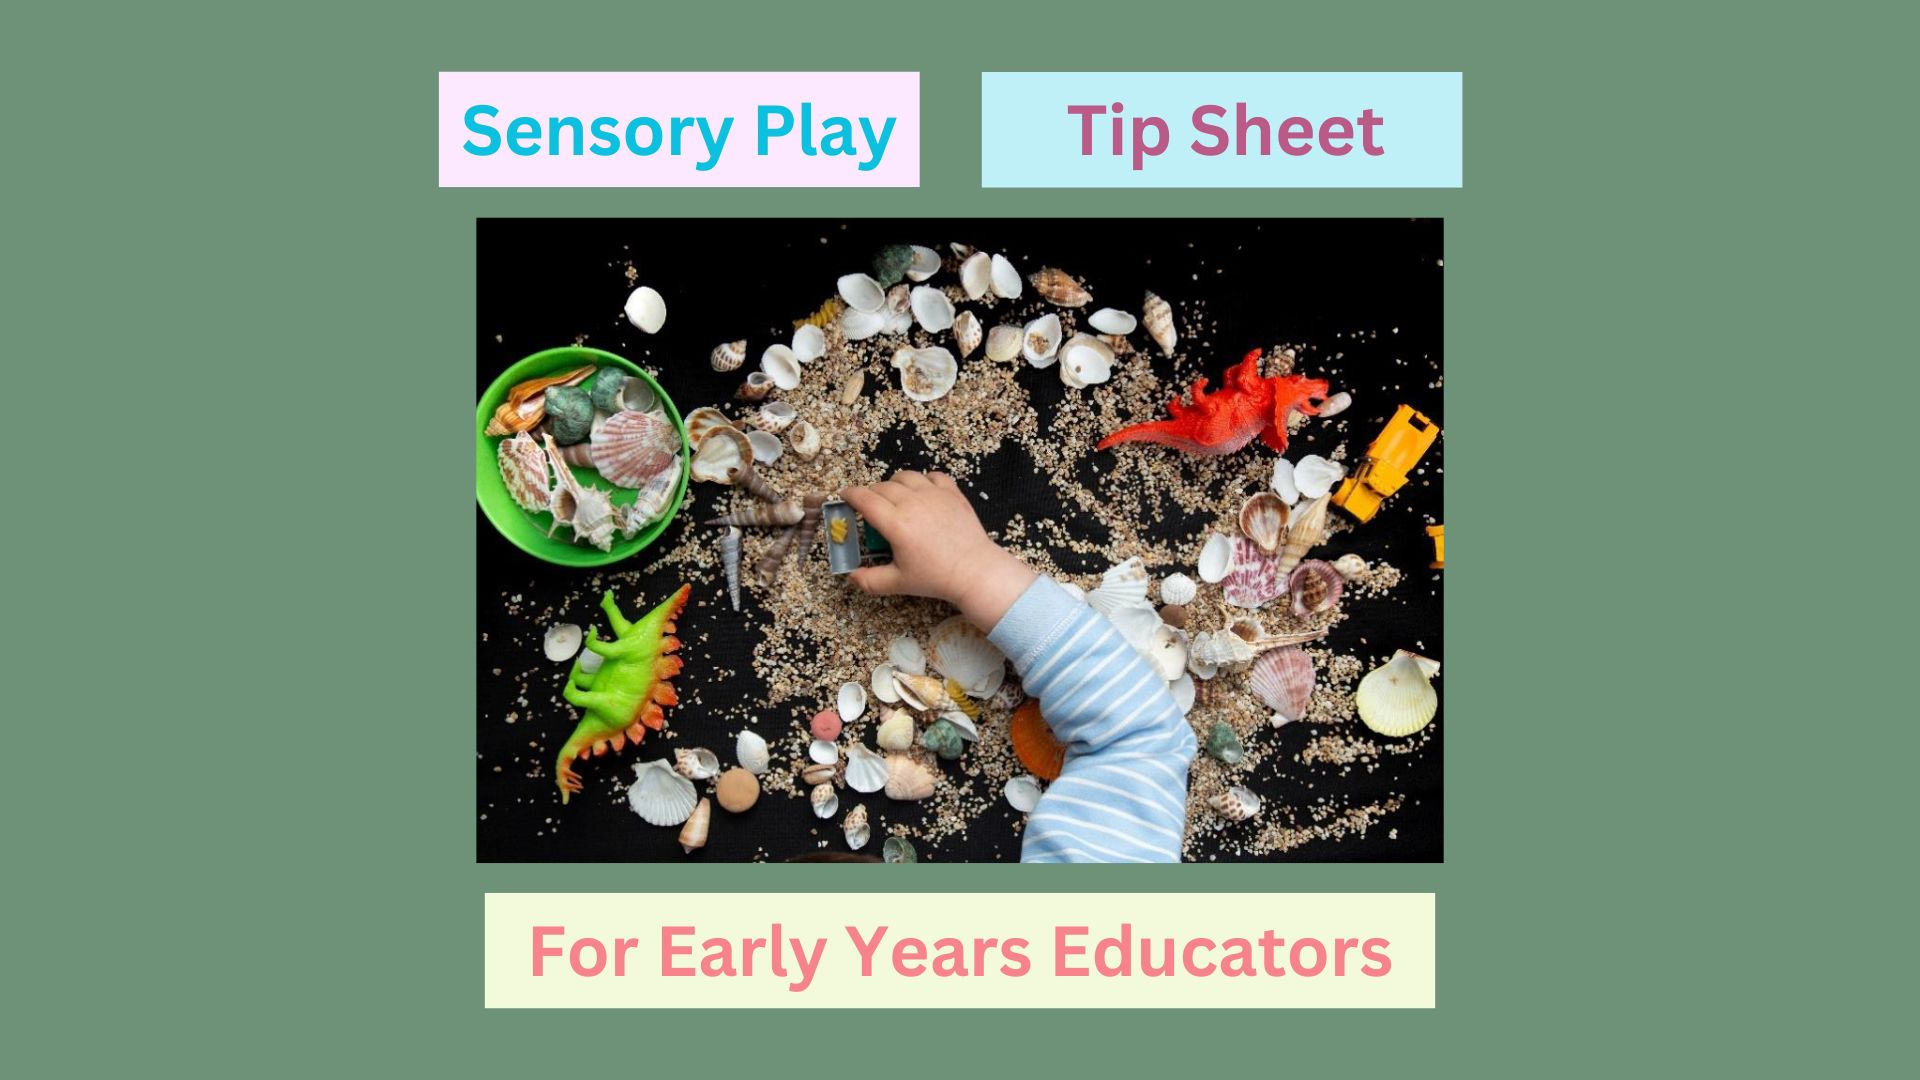 Tips and Information for Sensory Play